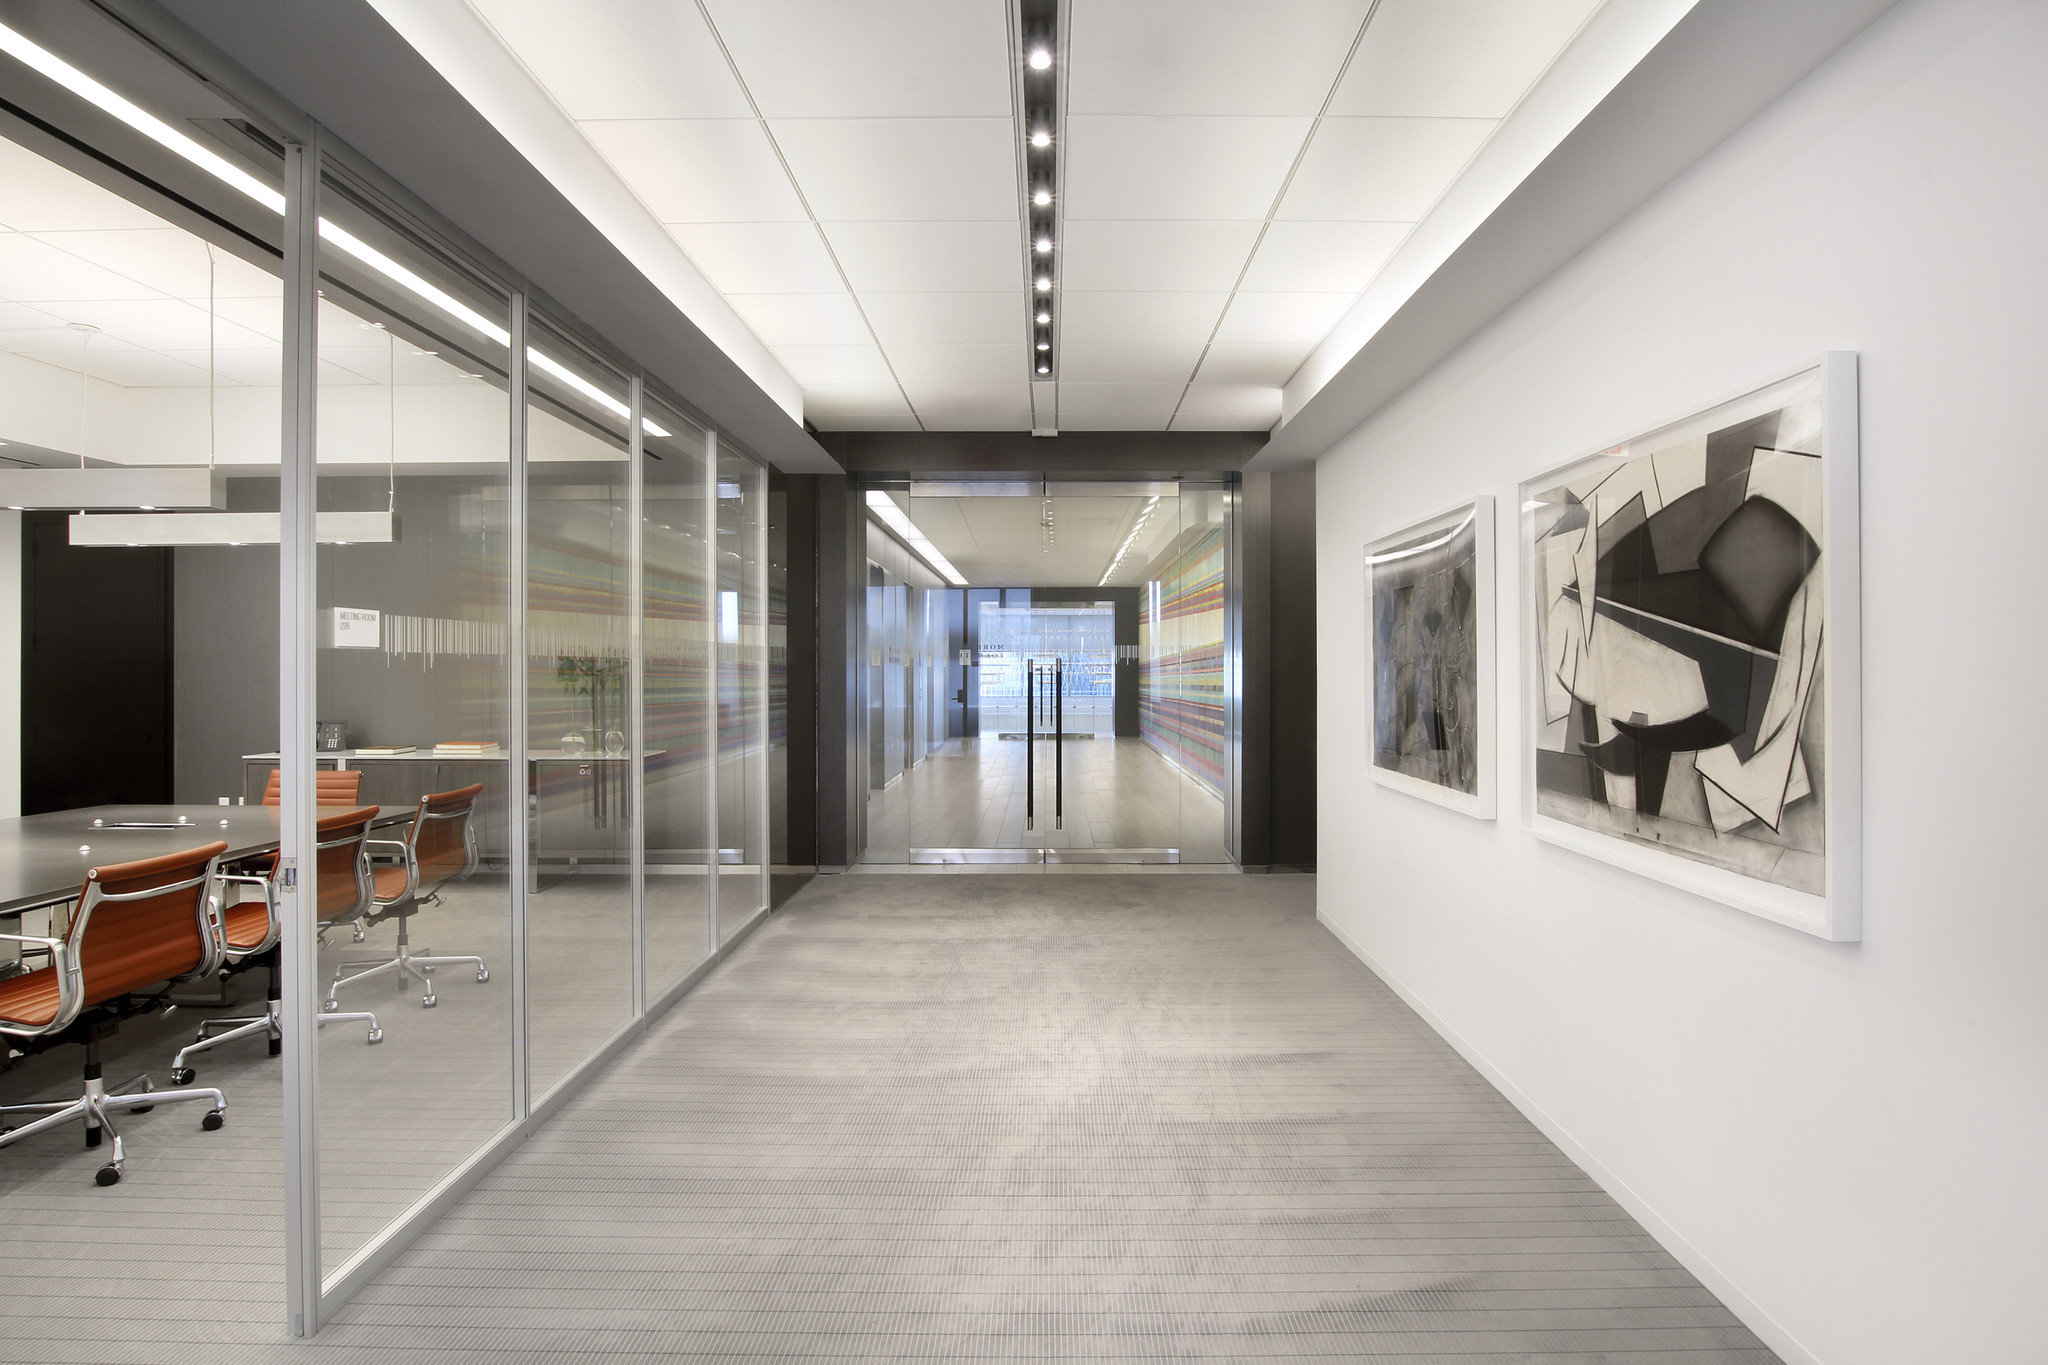 grs hardwood flooring distribution of aec daily online learning center certifications throughout cove lighting systems deliver a modern detail to ceilings and walls while providing the evenly distributed visually comforting illumination of indirect